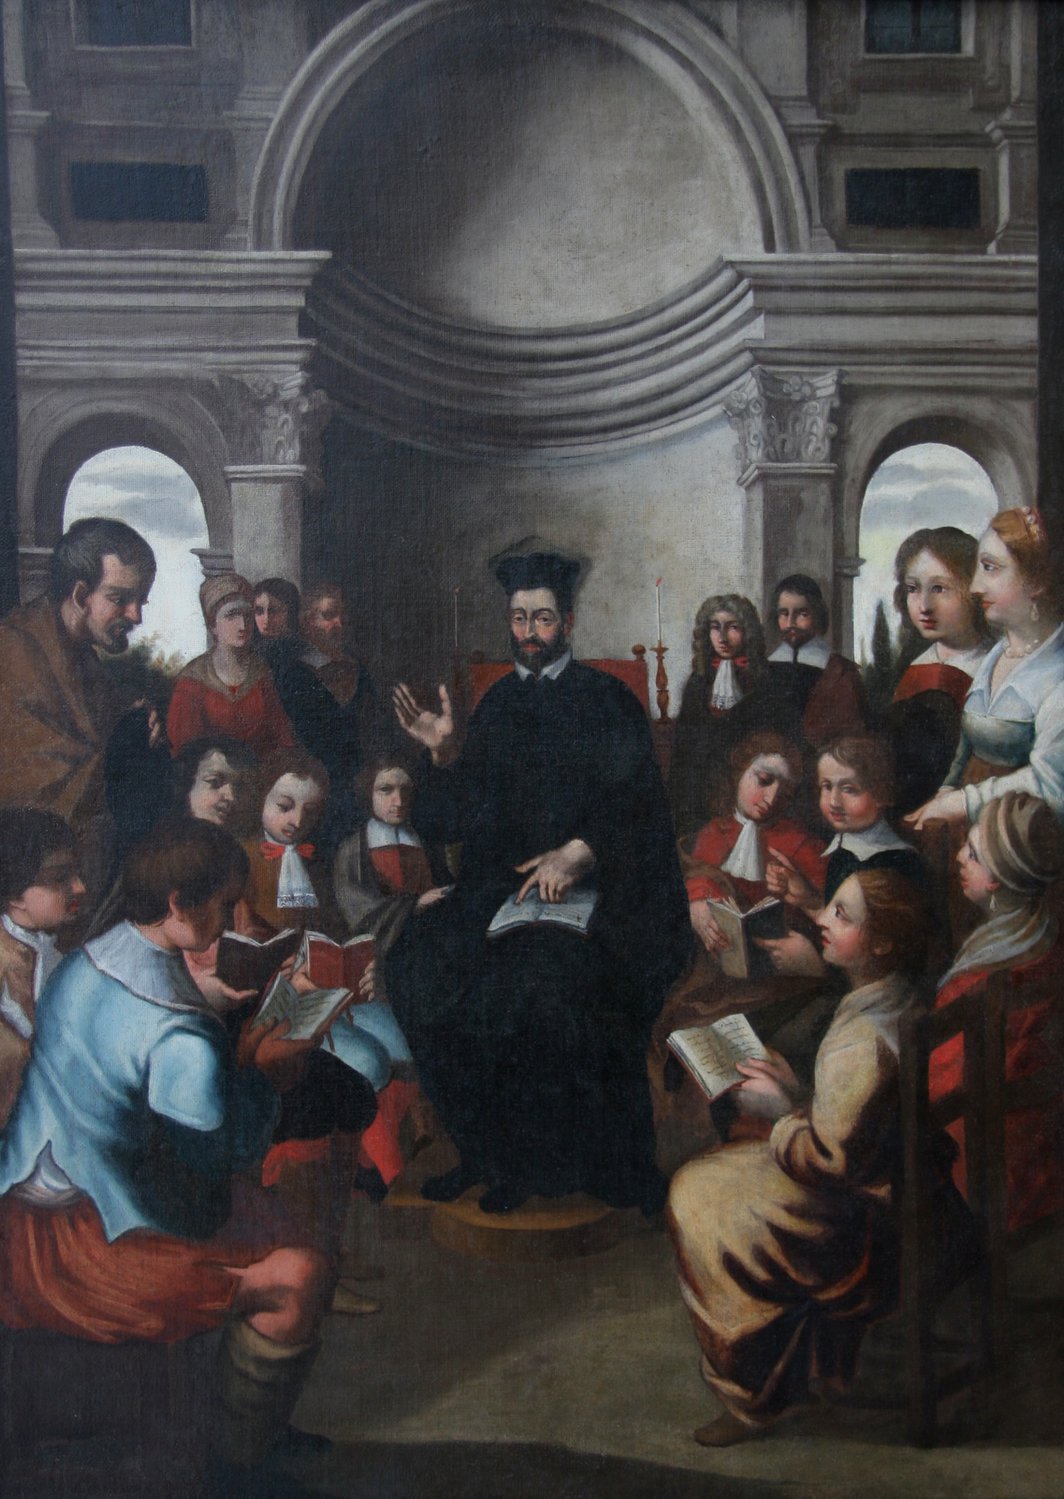 Blessed César de Bus, who was born in 1544 in France and founded the Christian Doctrine Fathers, is pictured in a painting. He is among 10 new saints to be proclaimed by Pope Francis at a May 15 Vatican canonization ceremony.